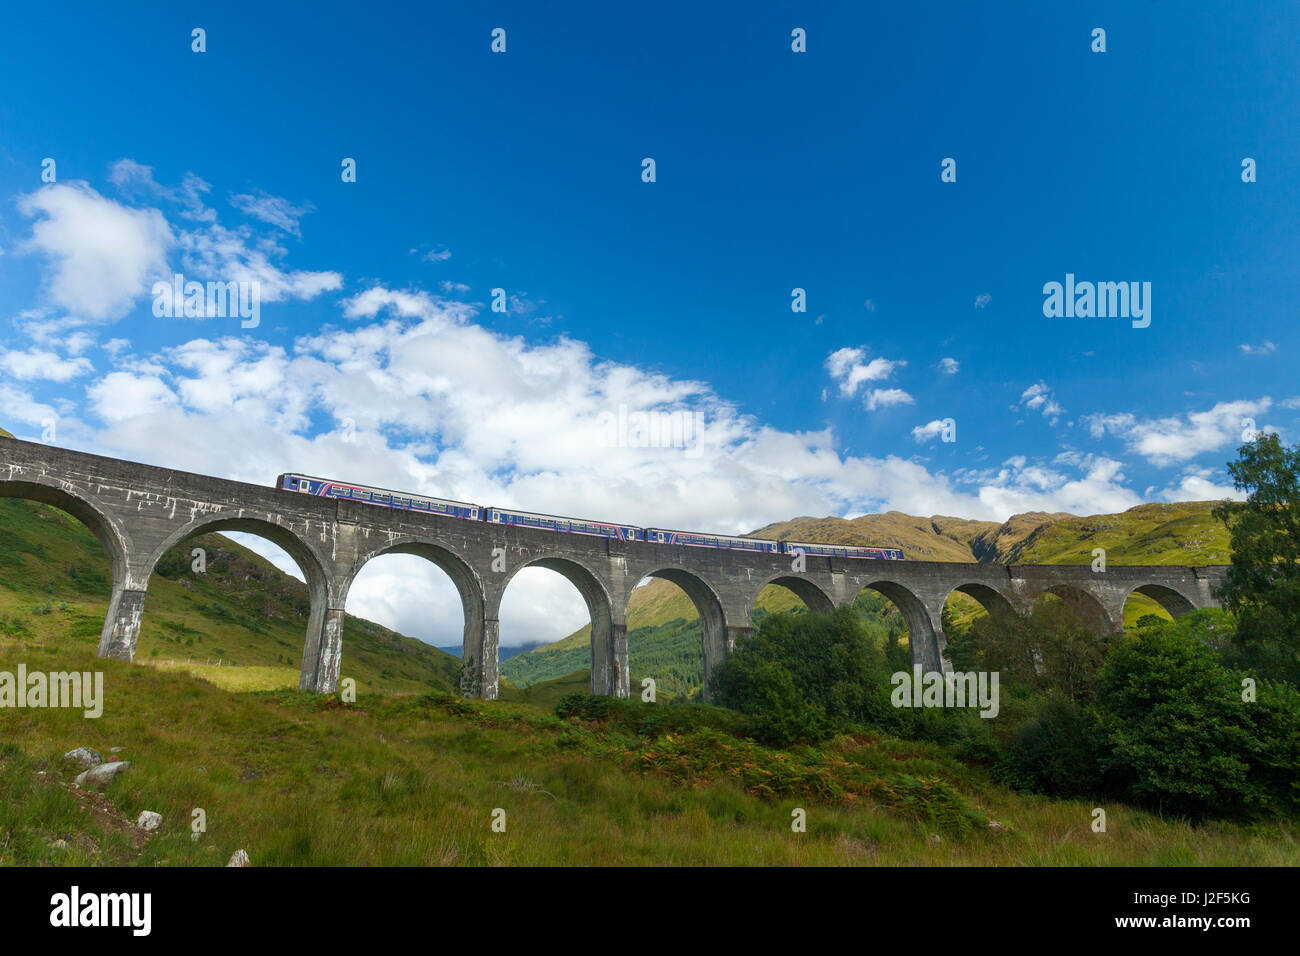 The Glenfinnan Viaduct, built in 1898, is built as single-track railway bridge over the valley and river. The big turn is necessary to lead the train from one hill to another hill The bridge has been used in various films including Harry Potter. Stock Photo